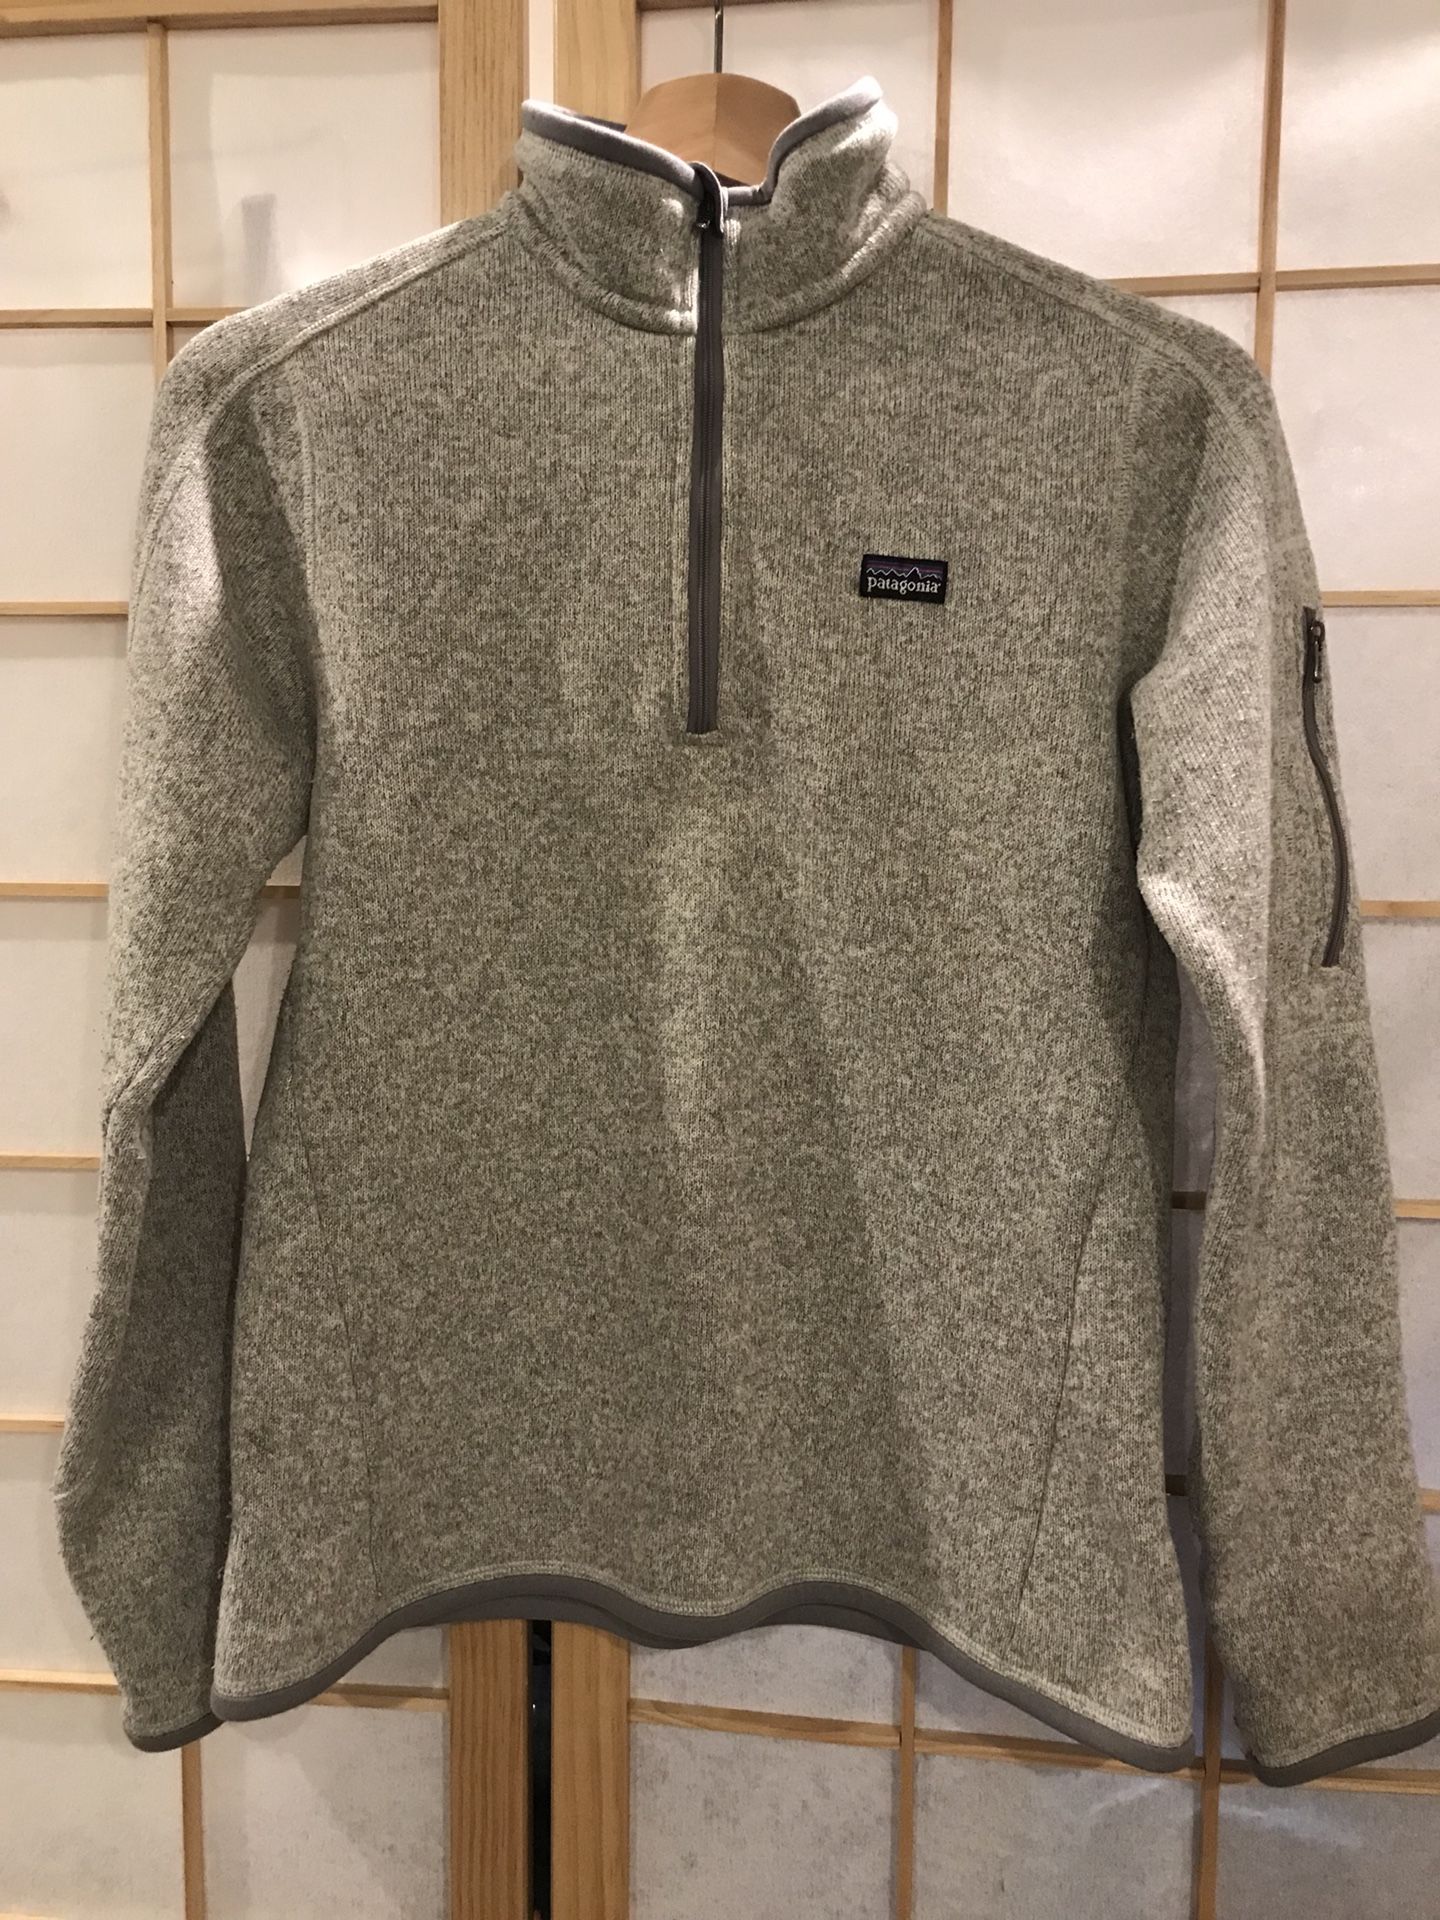 Patagonia Women’s sweater size Small